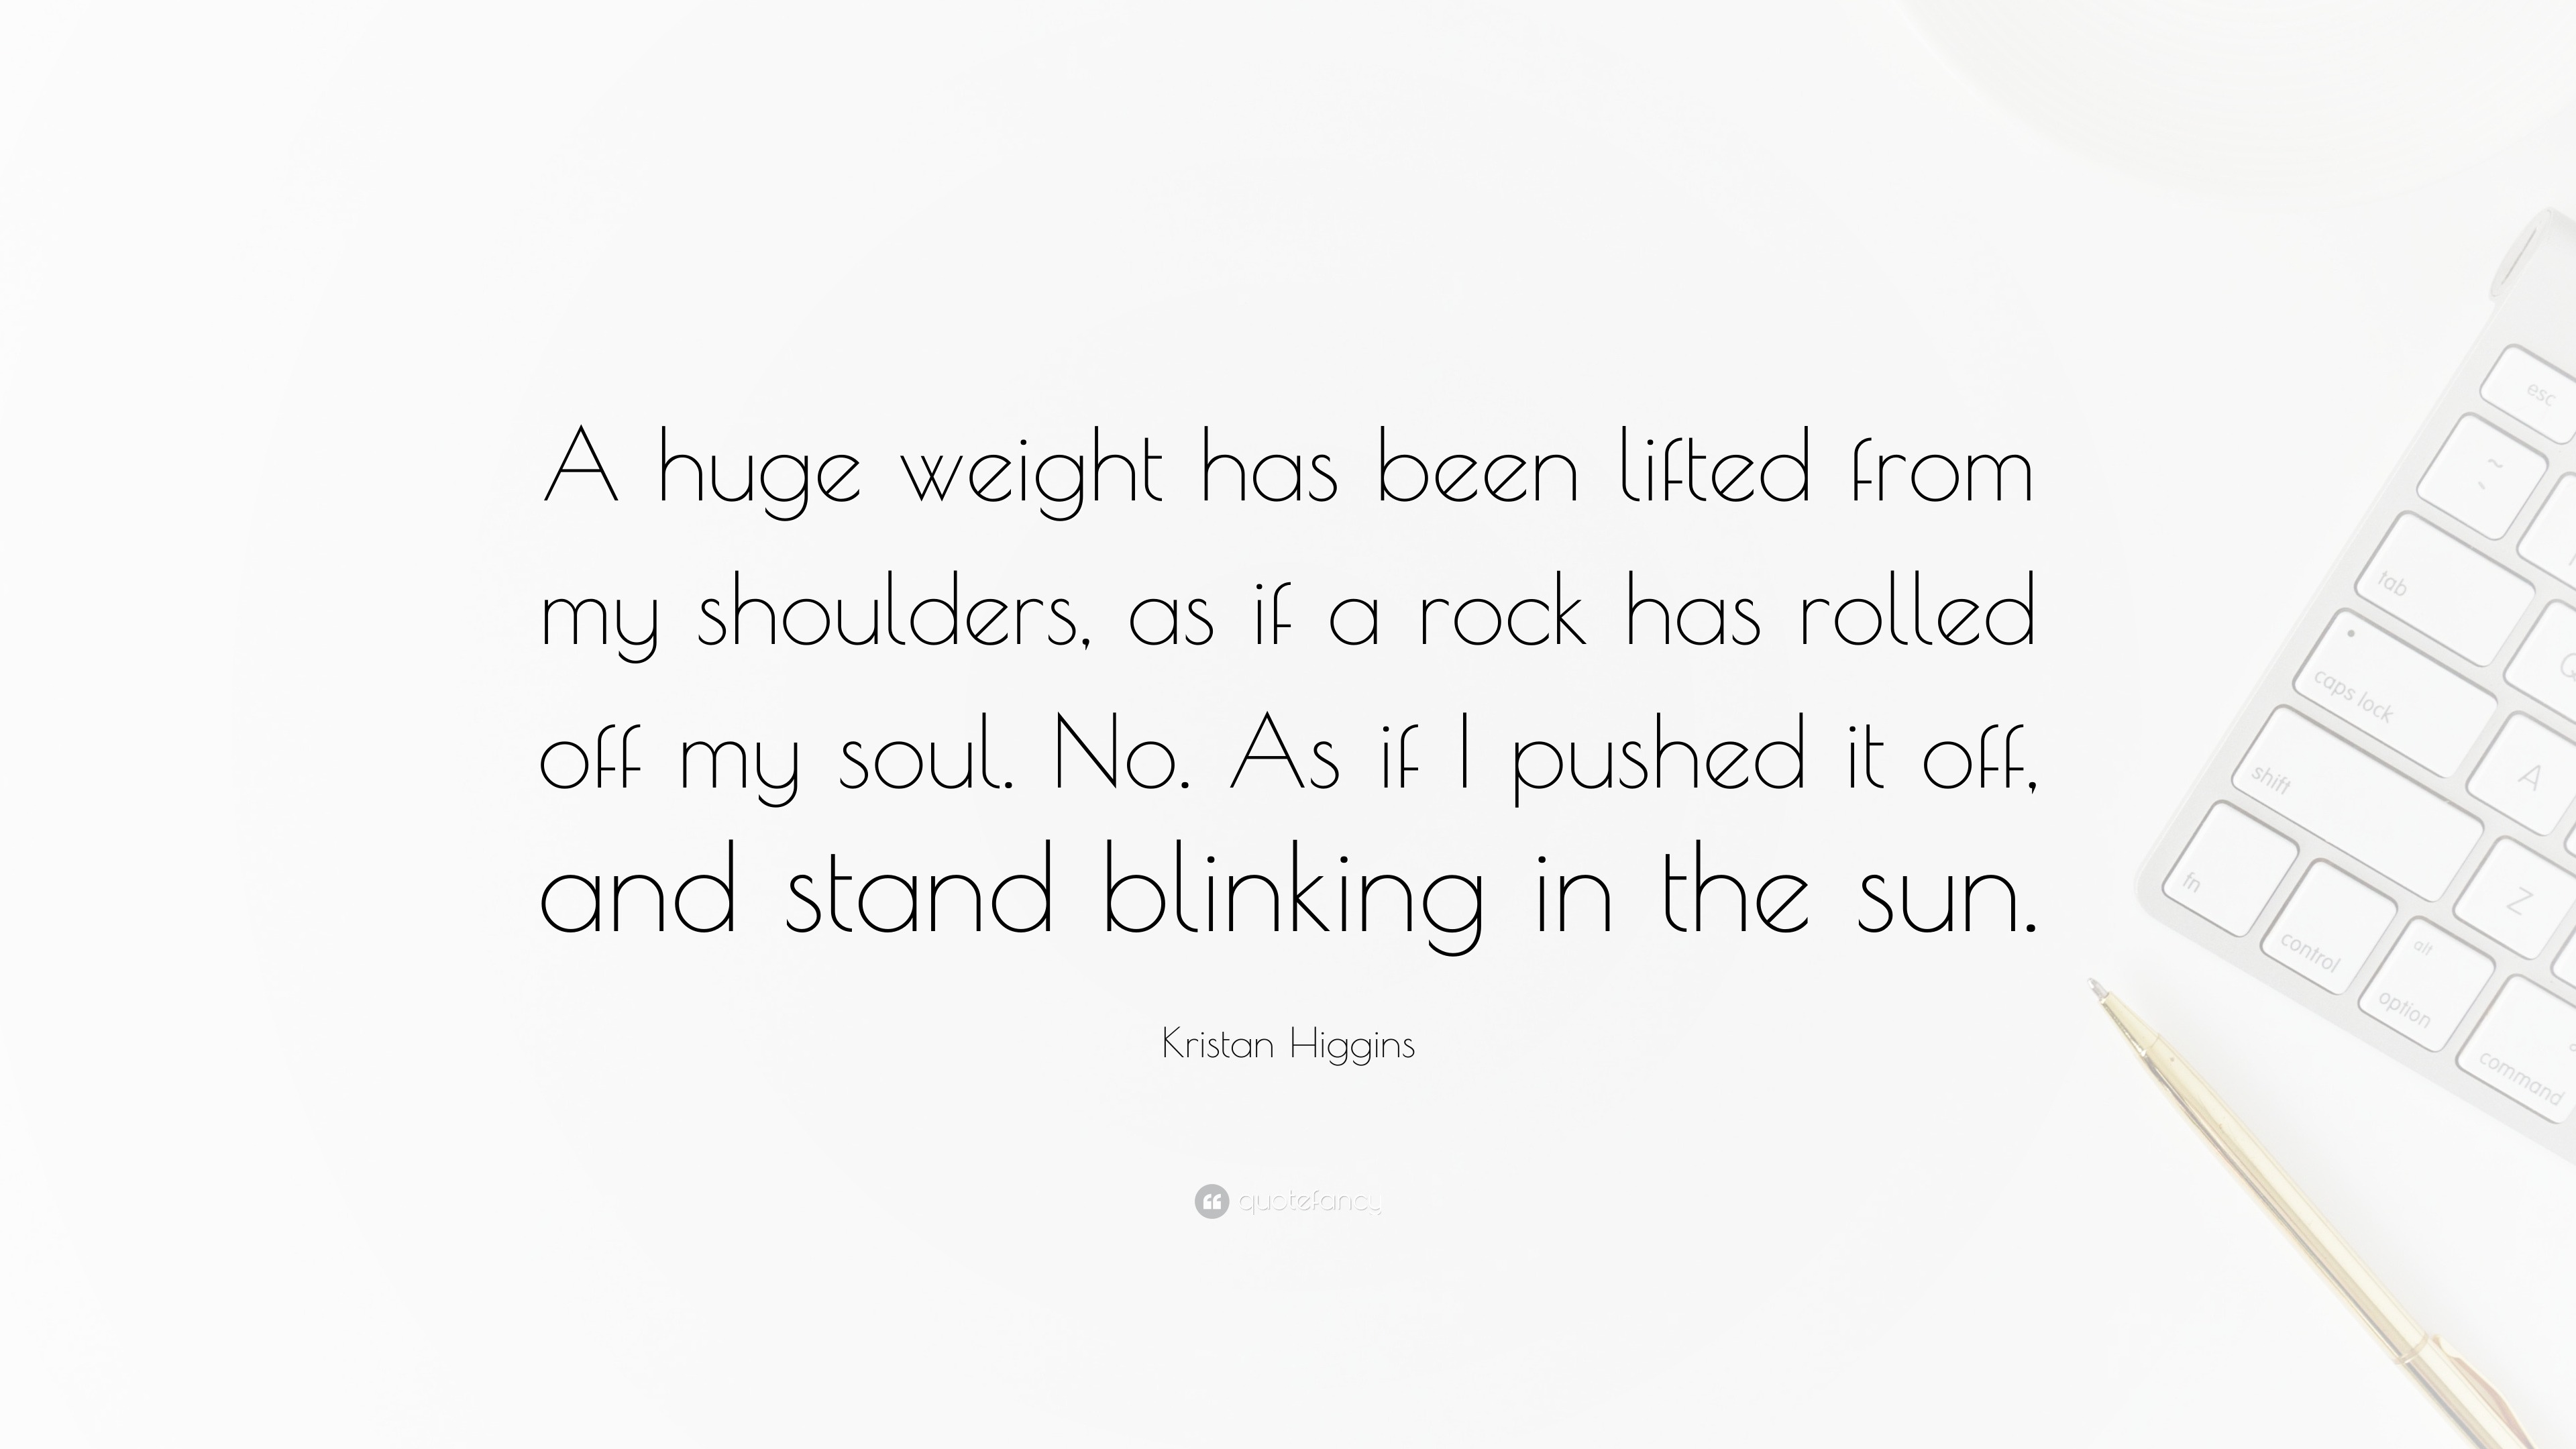 Kristan Higgins Quote: “A huge weight has been lifted from my shoulders, as  if a rock has rolled off my soul. No. As if I pushed it off, and sta”